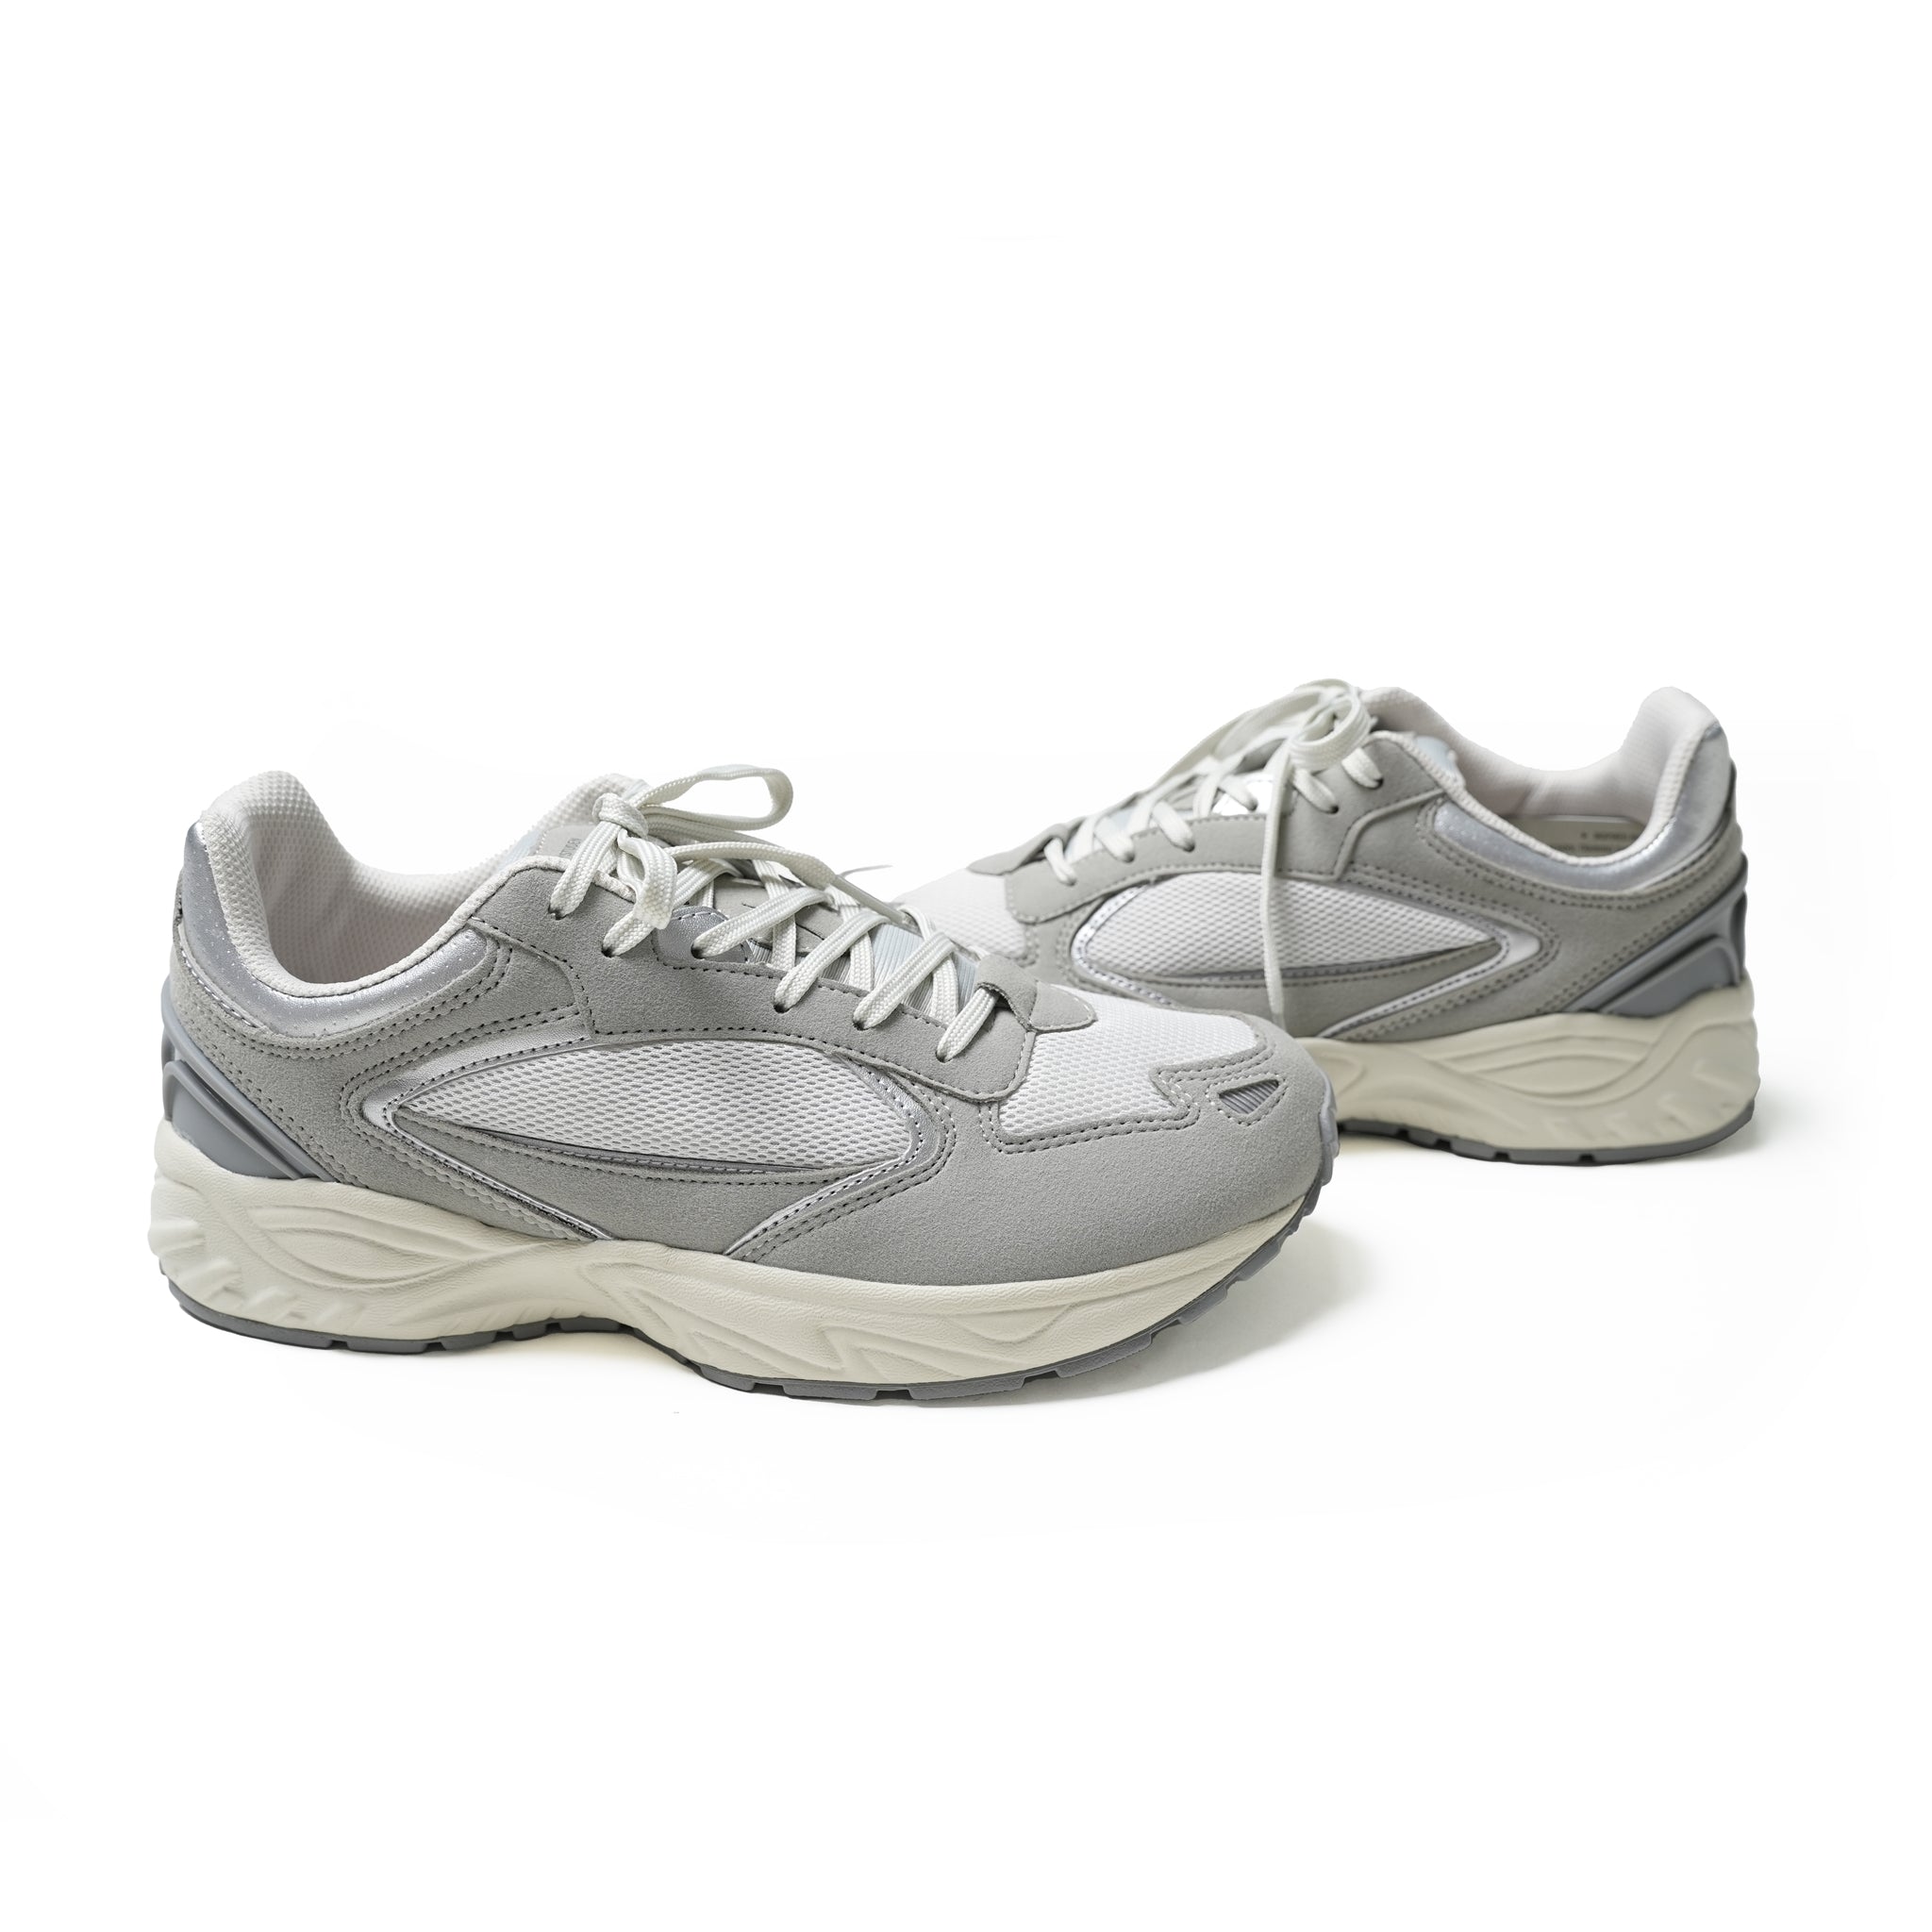 NO:ET002 | Name:STUDEN スチューデン | Color:Silver Gray【810S_エイトテンス】【MOONSTAR_ムーンスター】